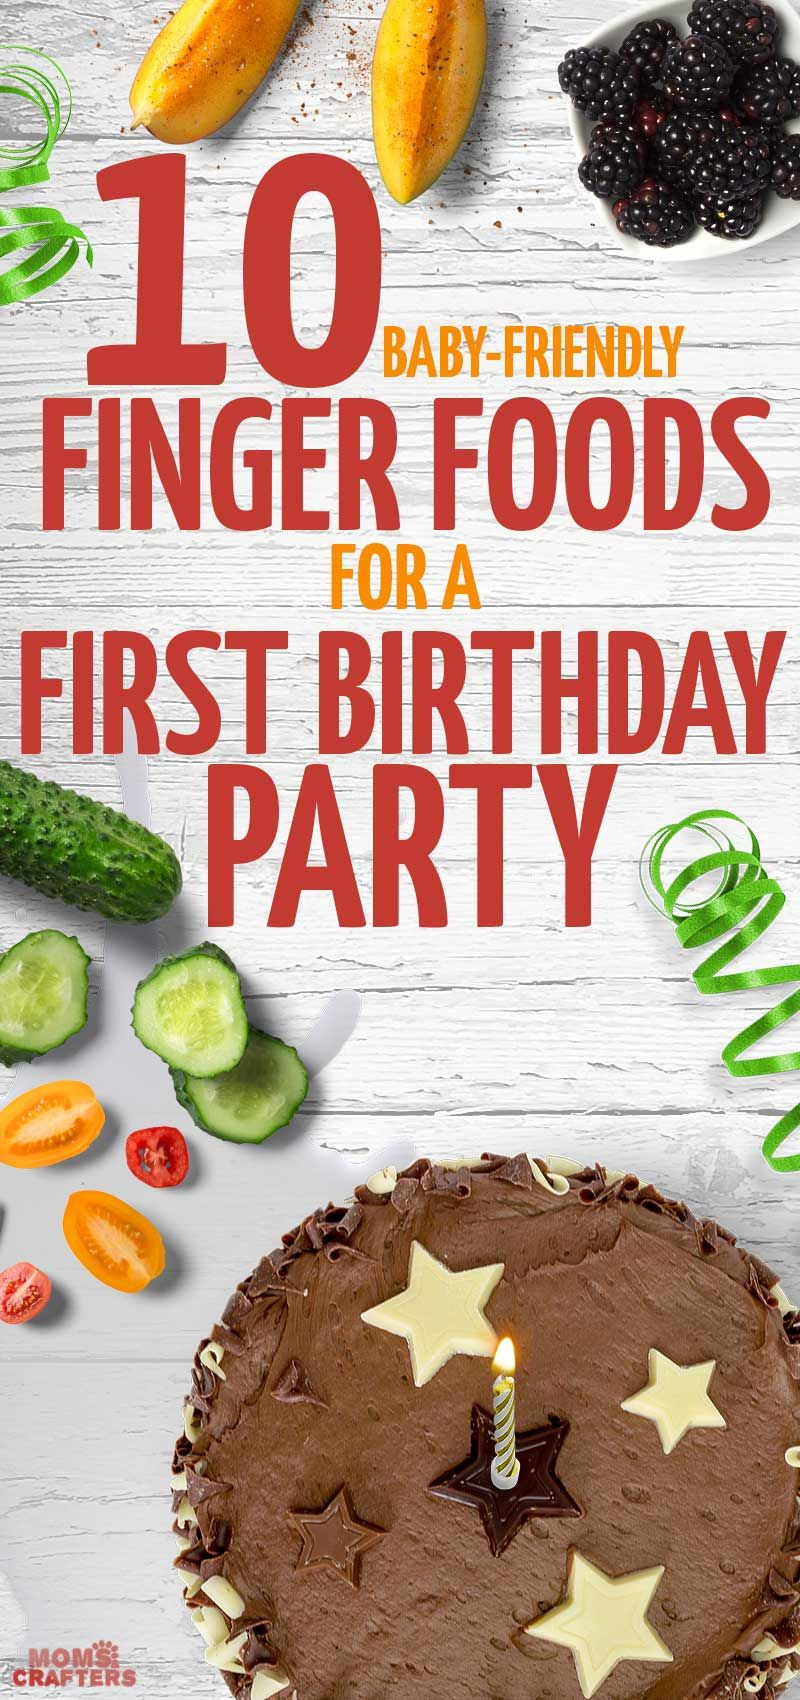 Food Ideas For 1st Birthday Party
 10 Great Finger Foods for a First Birthday Party